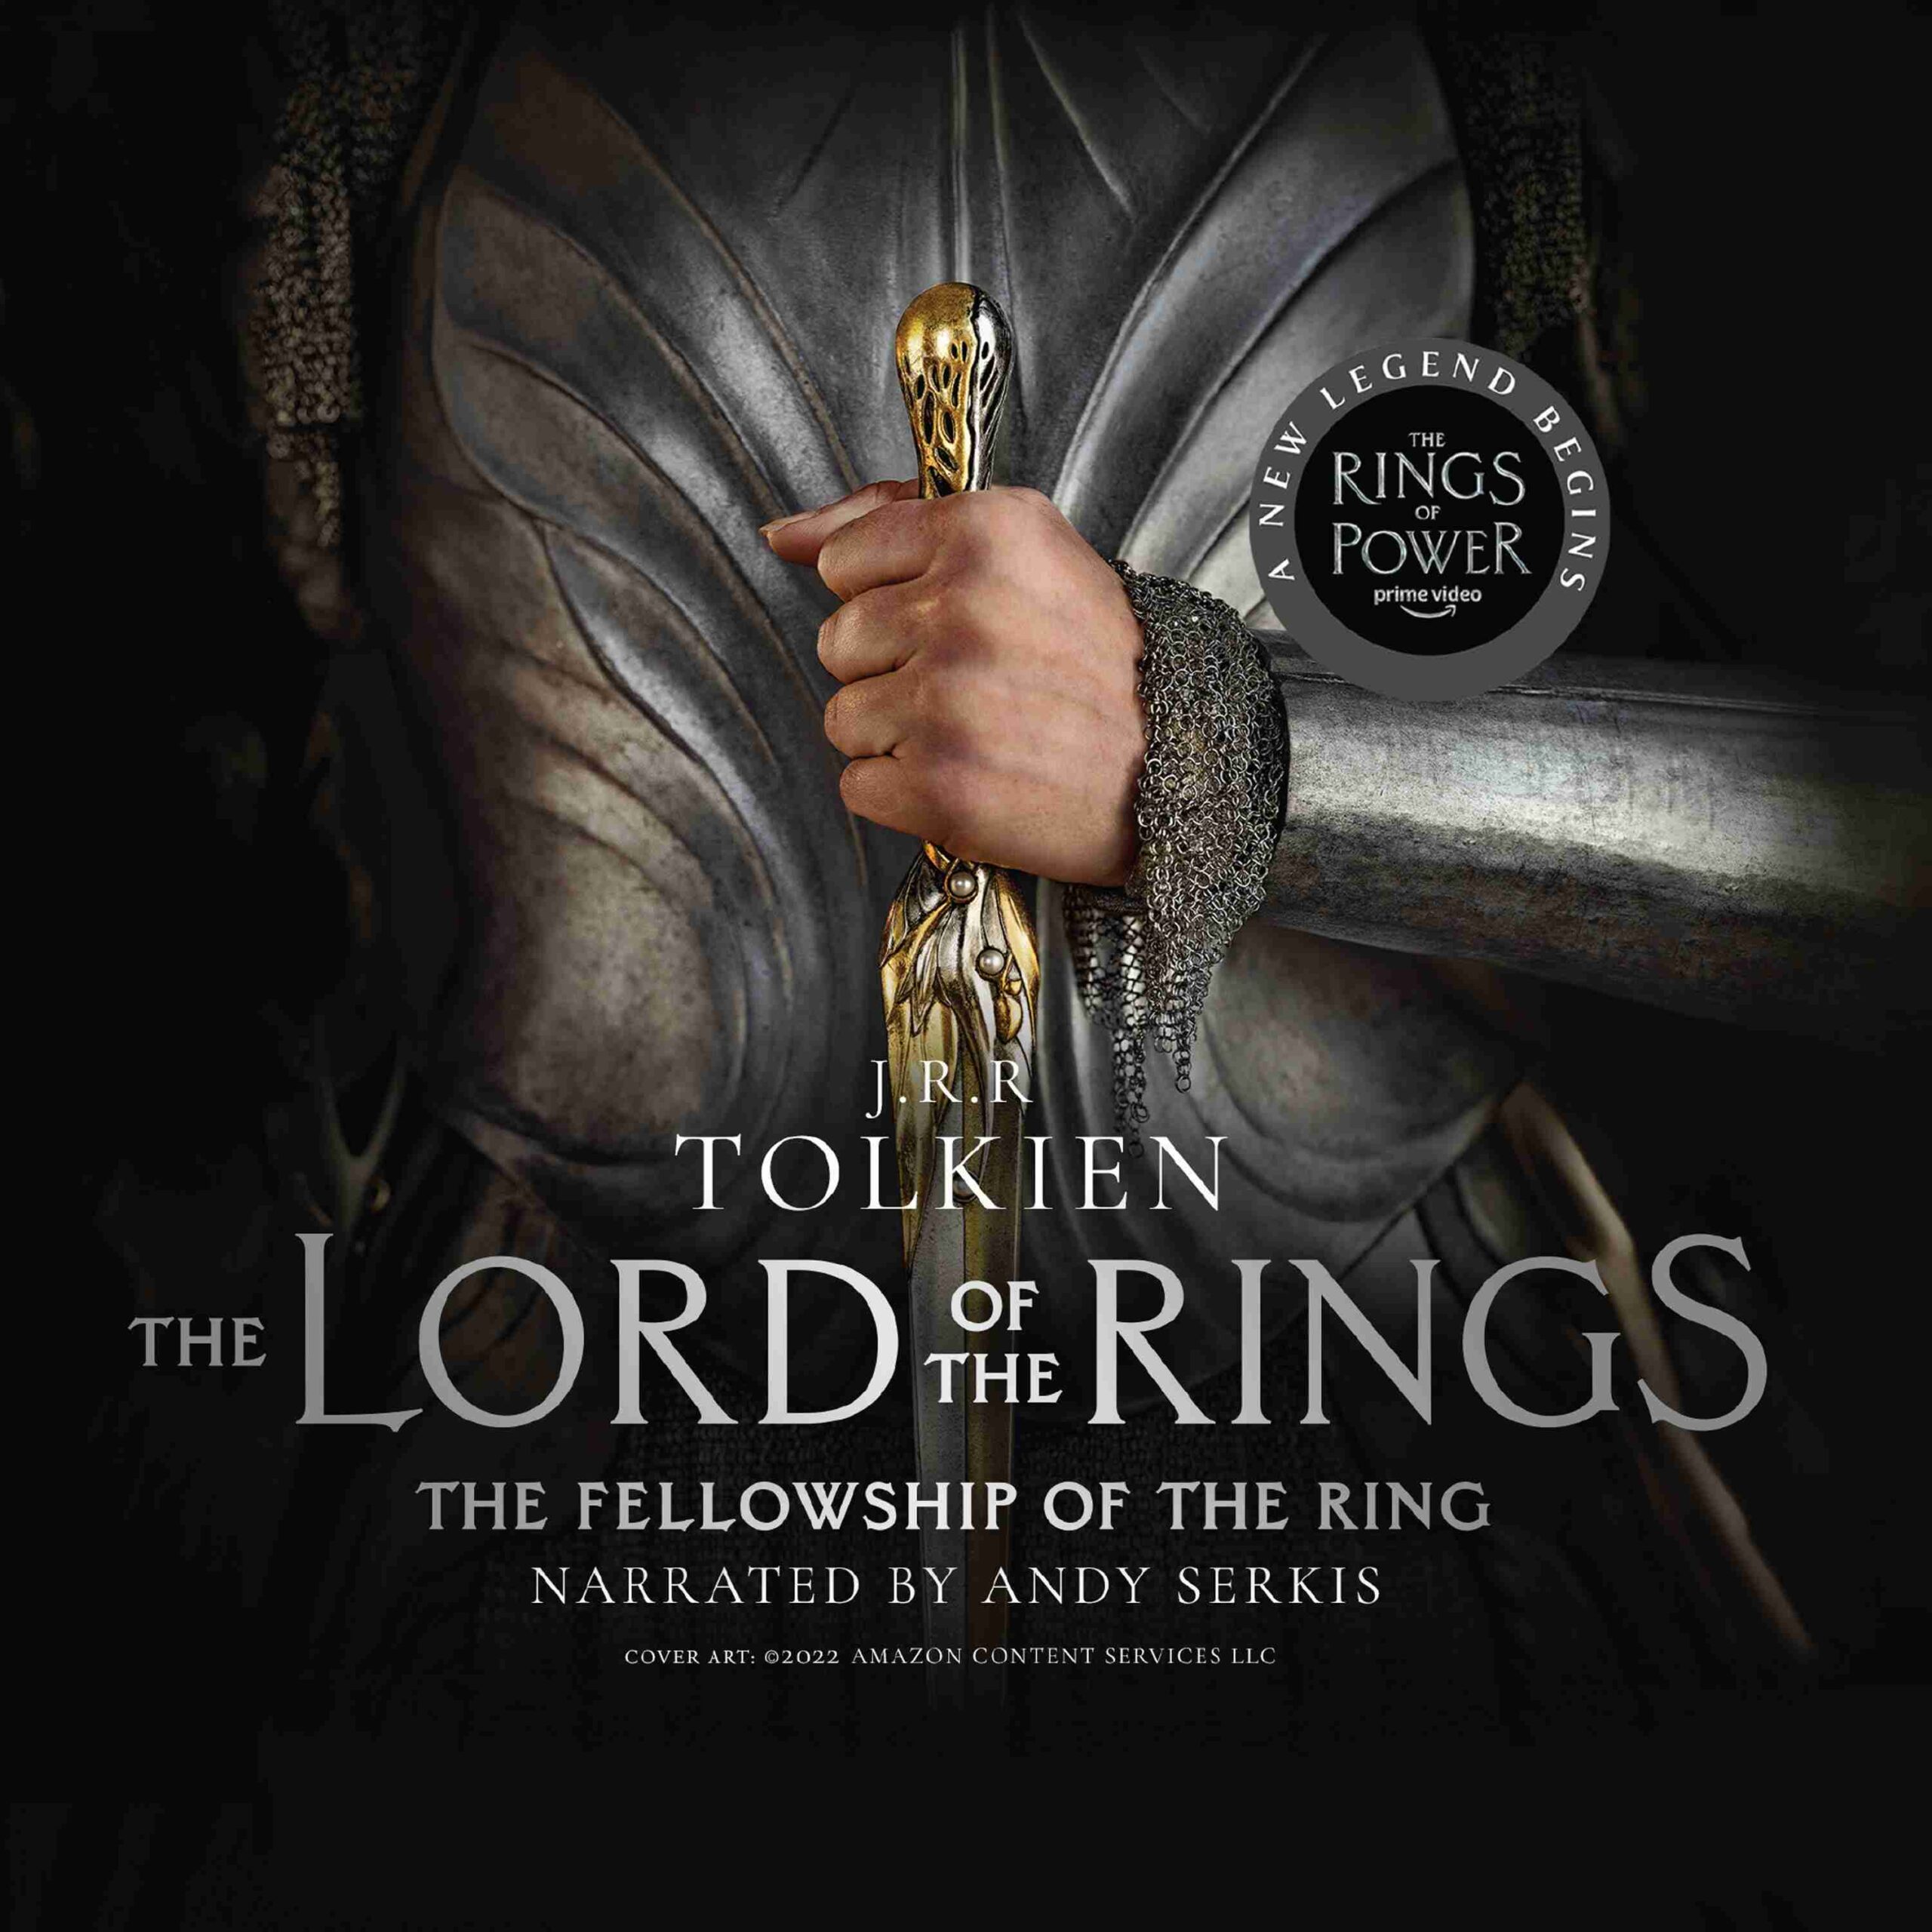 The Fellowship of the Ring byJ. R. R. Tolkien Audiobook. 29.99 USD